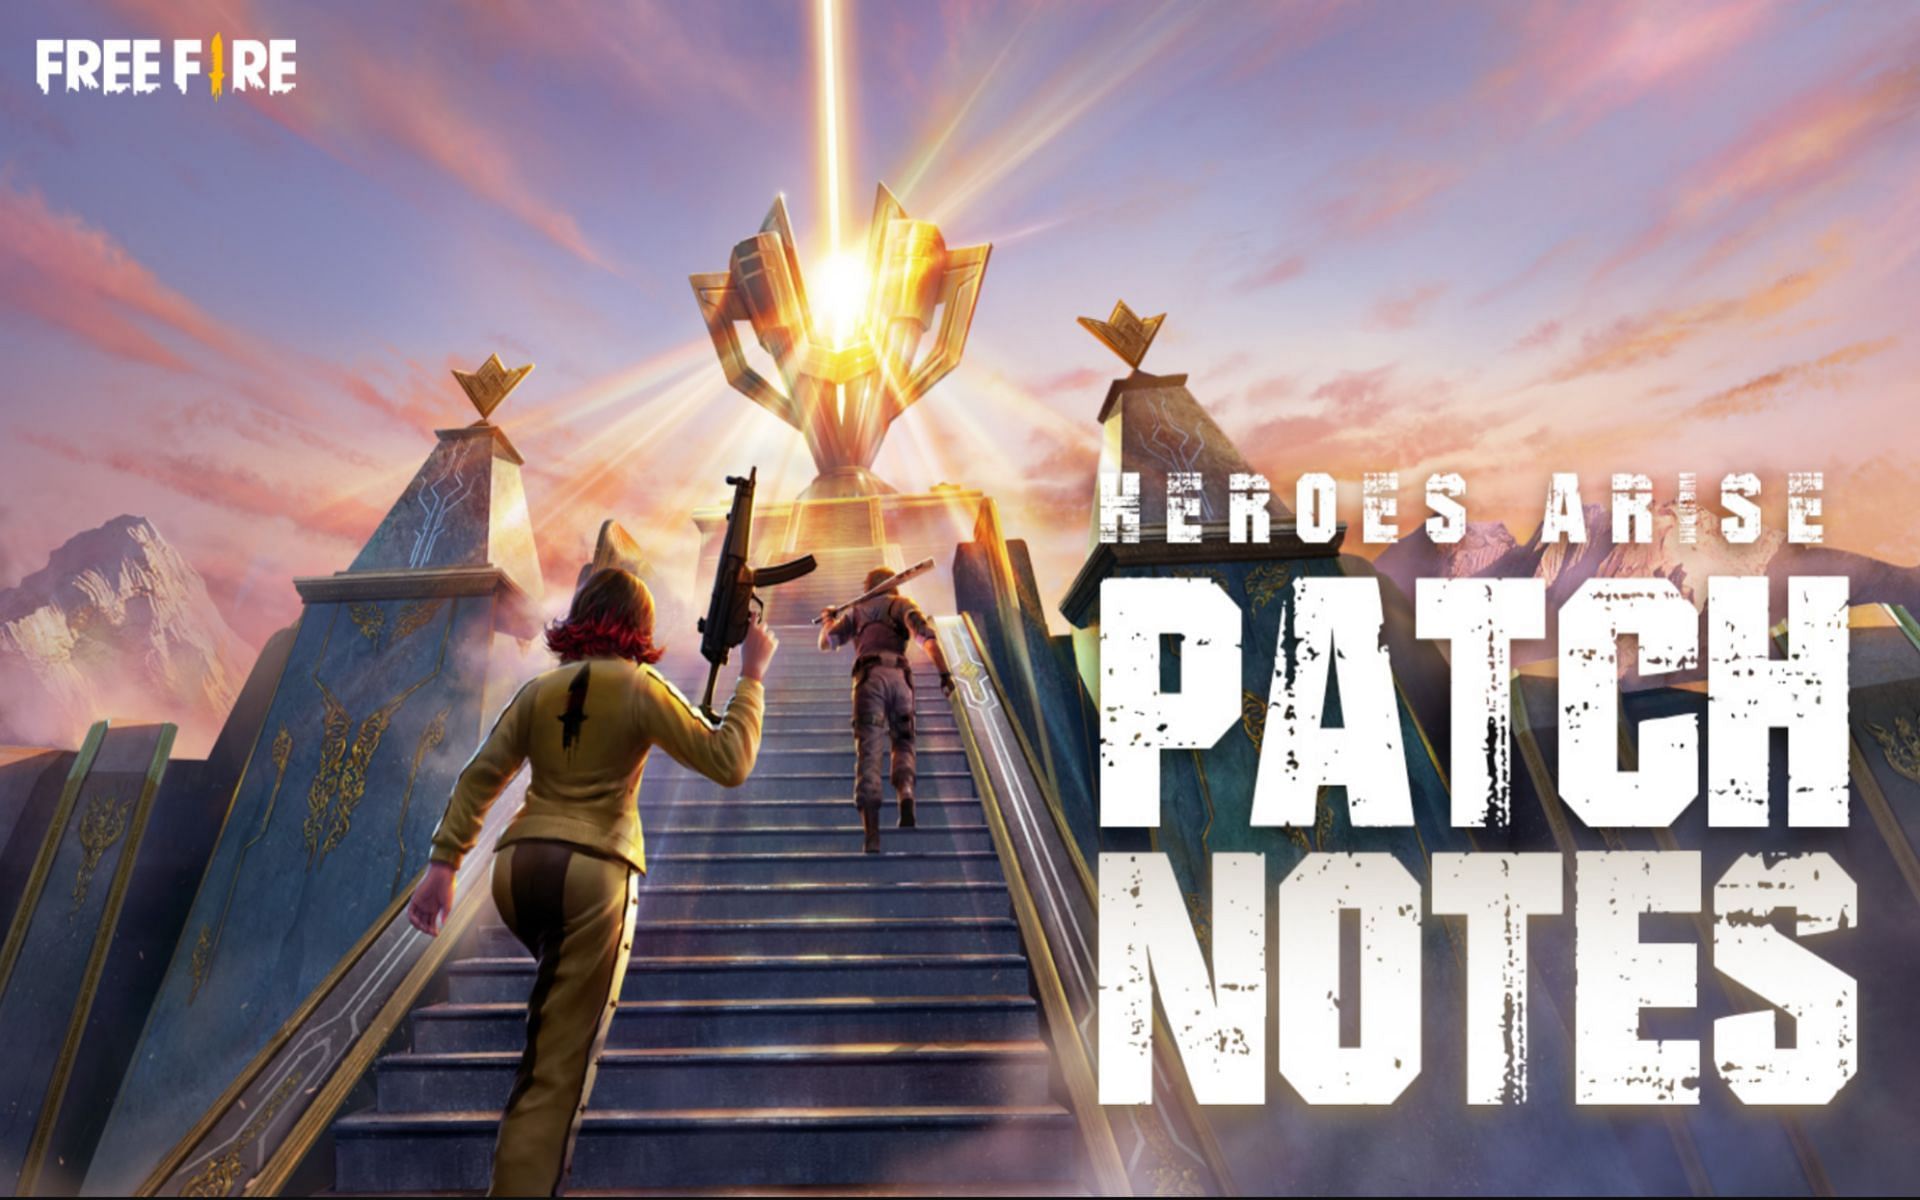 Free Fire OB33 update patch notes are now out (Image via Garena)